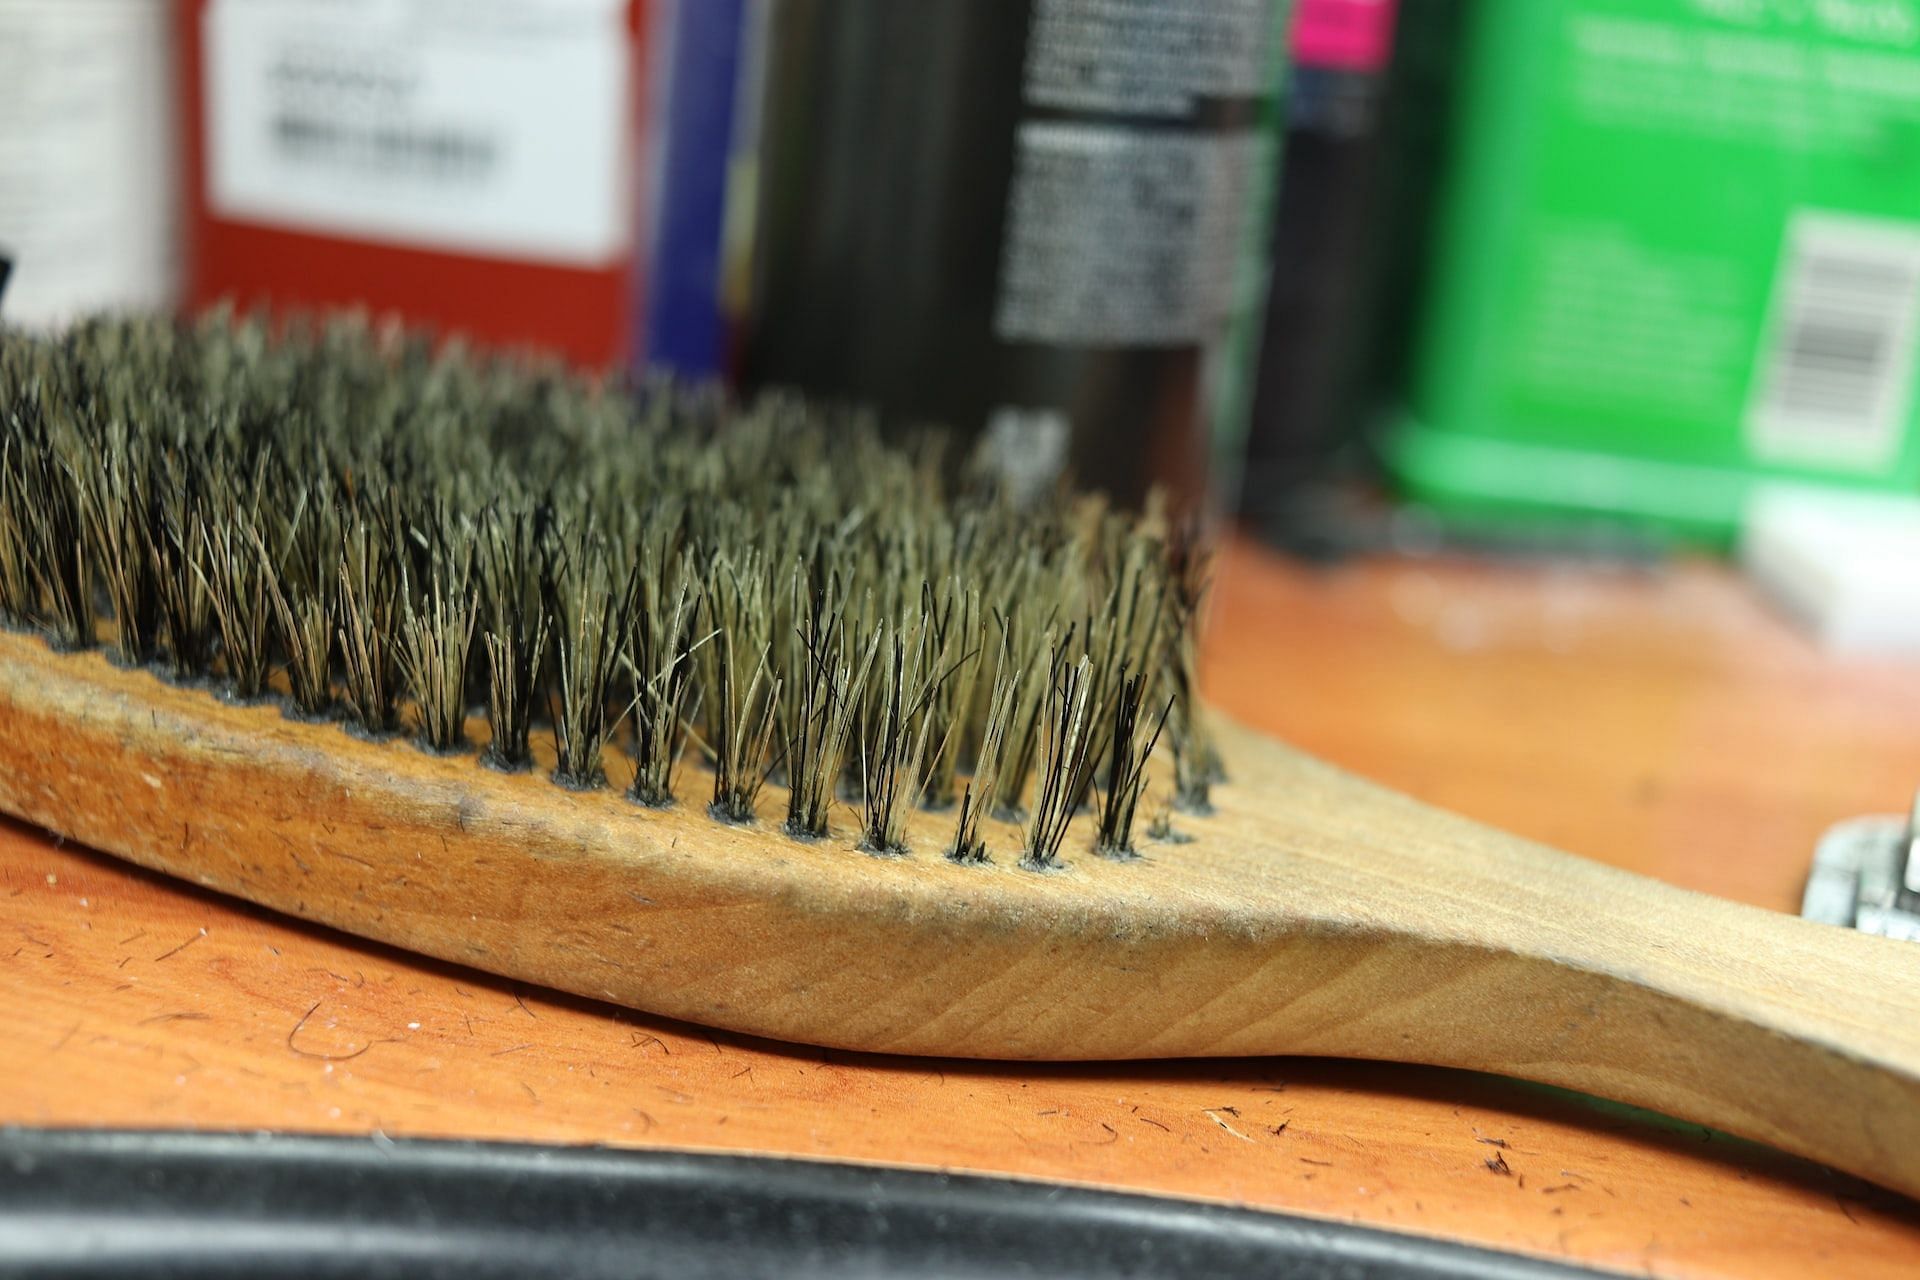 Clean hair brushes (Photo by Jacob Johnson on Unsplash)